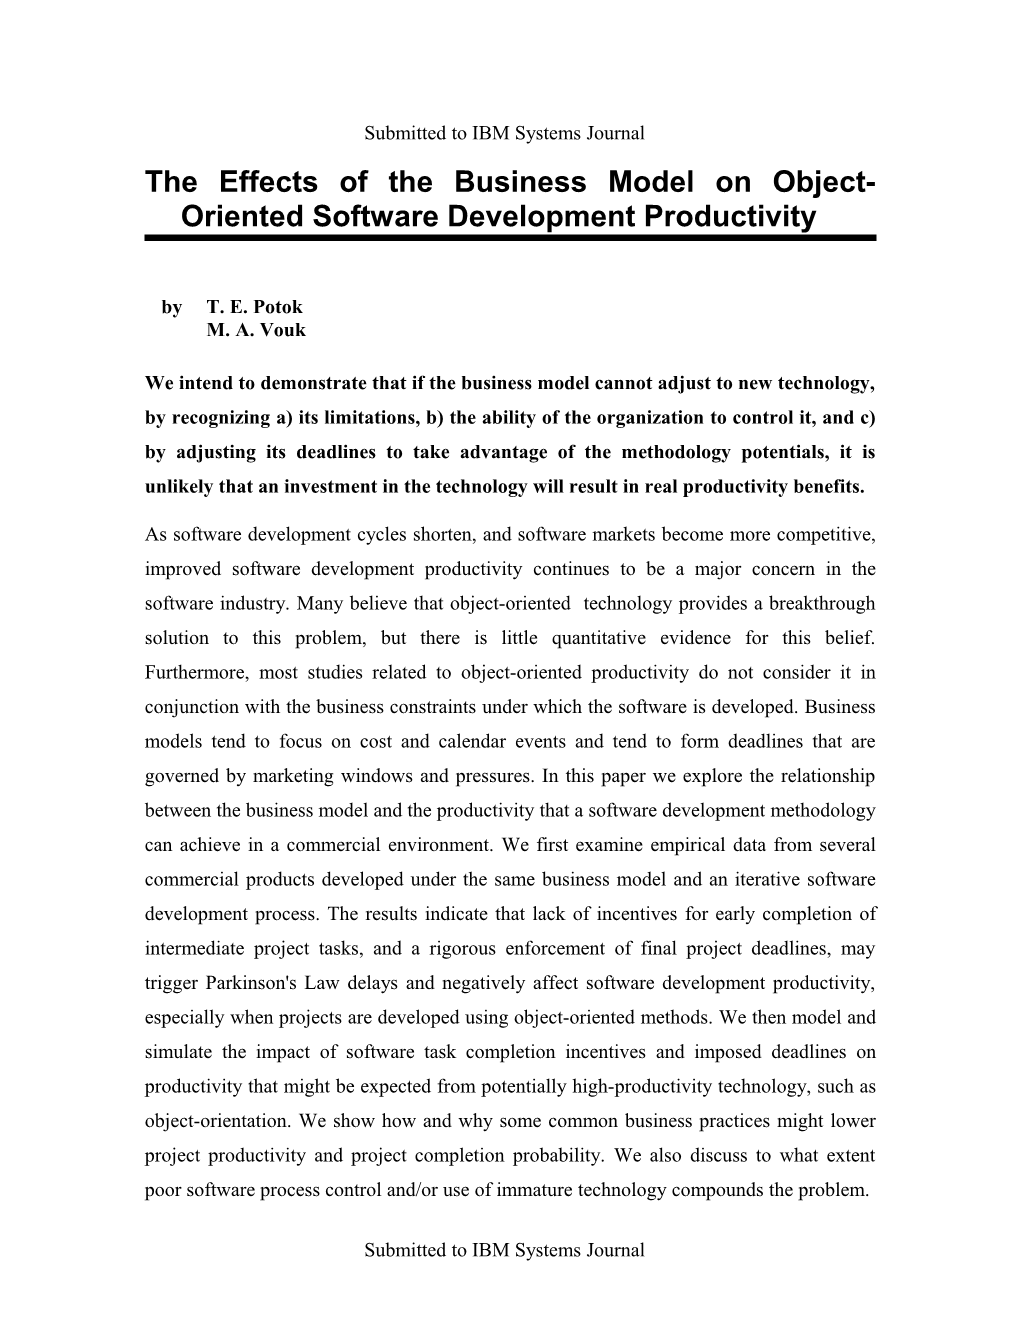 The Effects of the Business Model on Object-Oriented Software Development Productivity